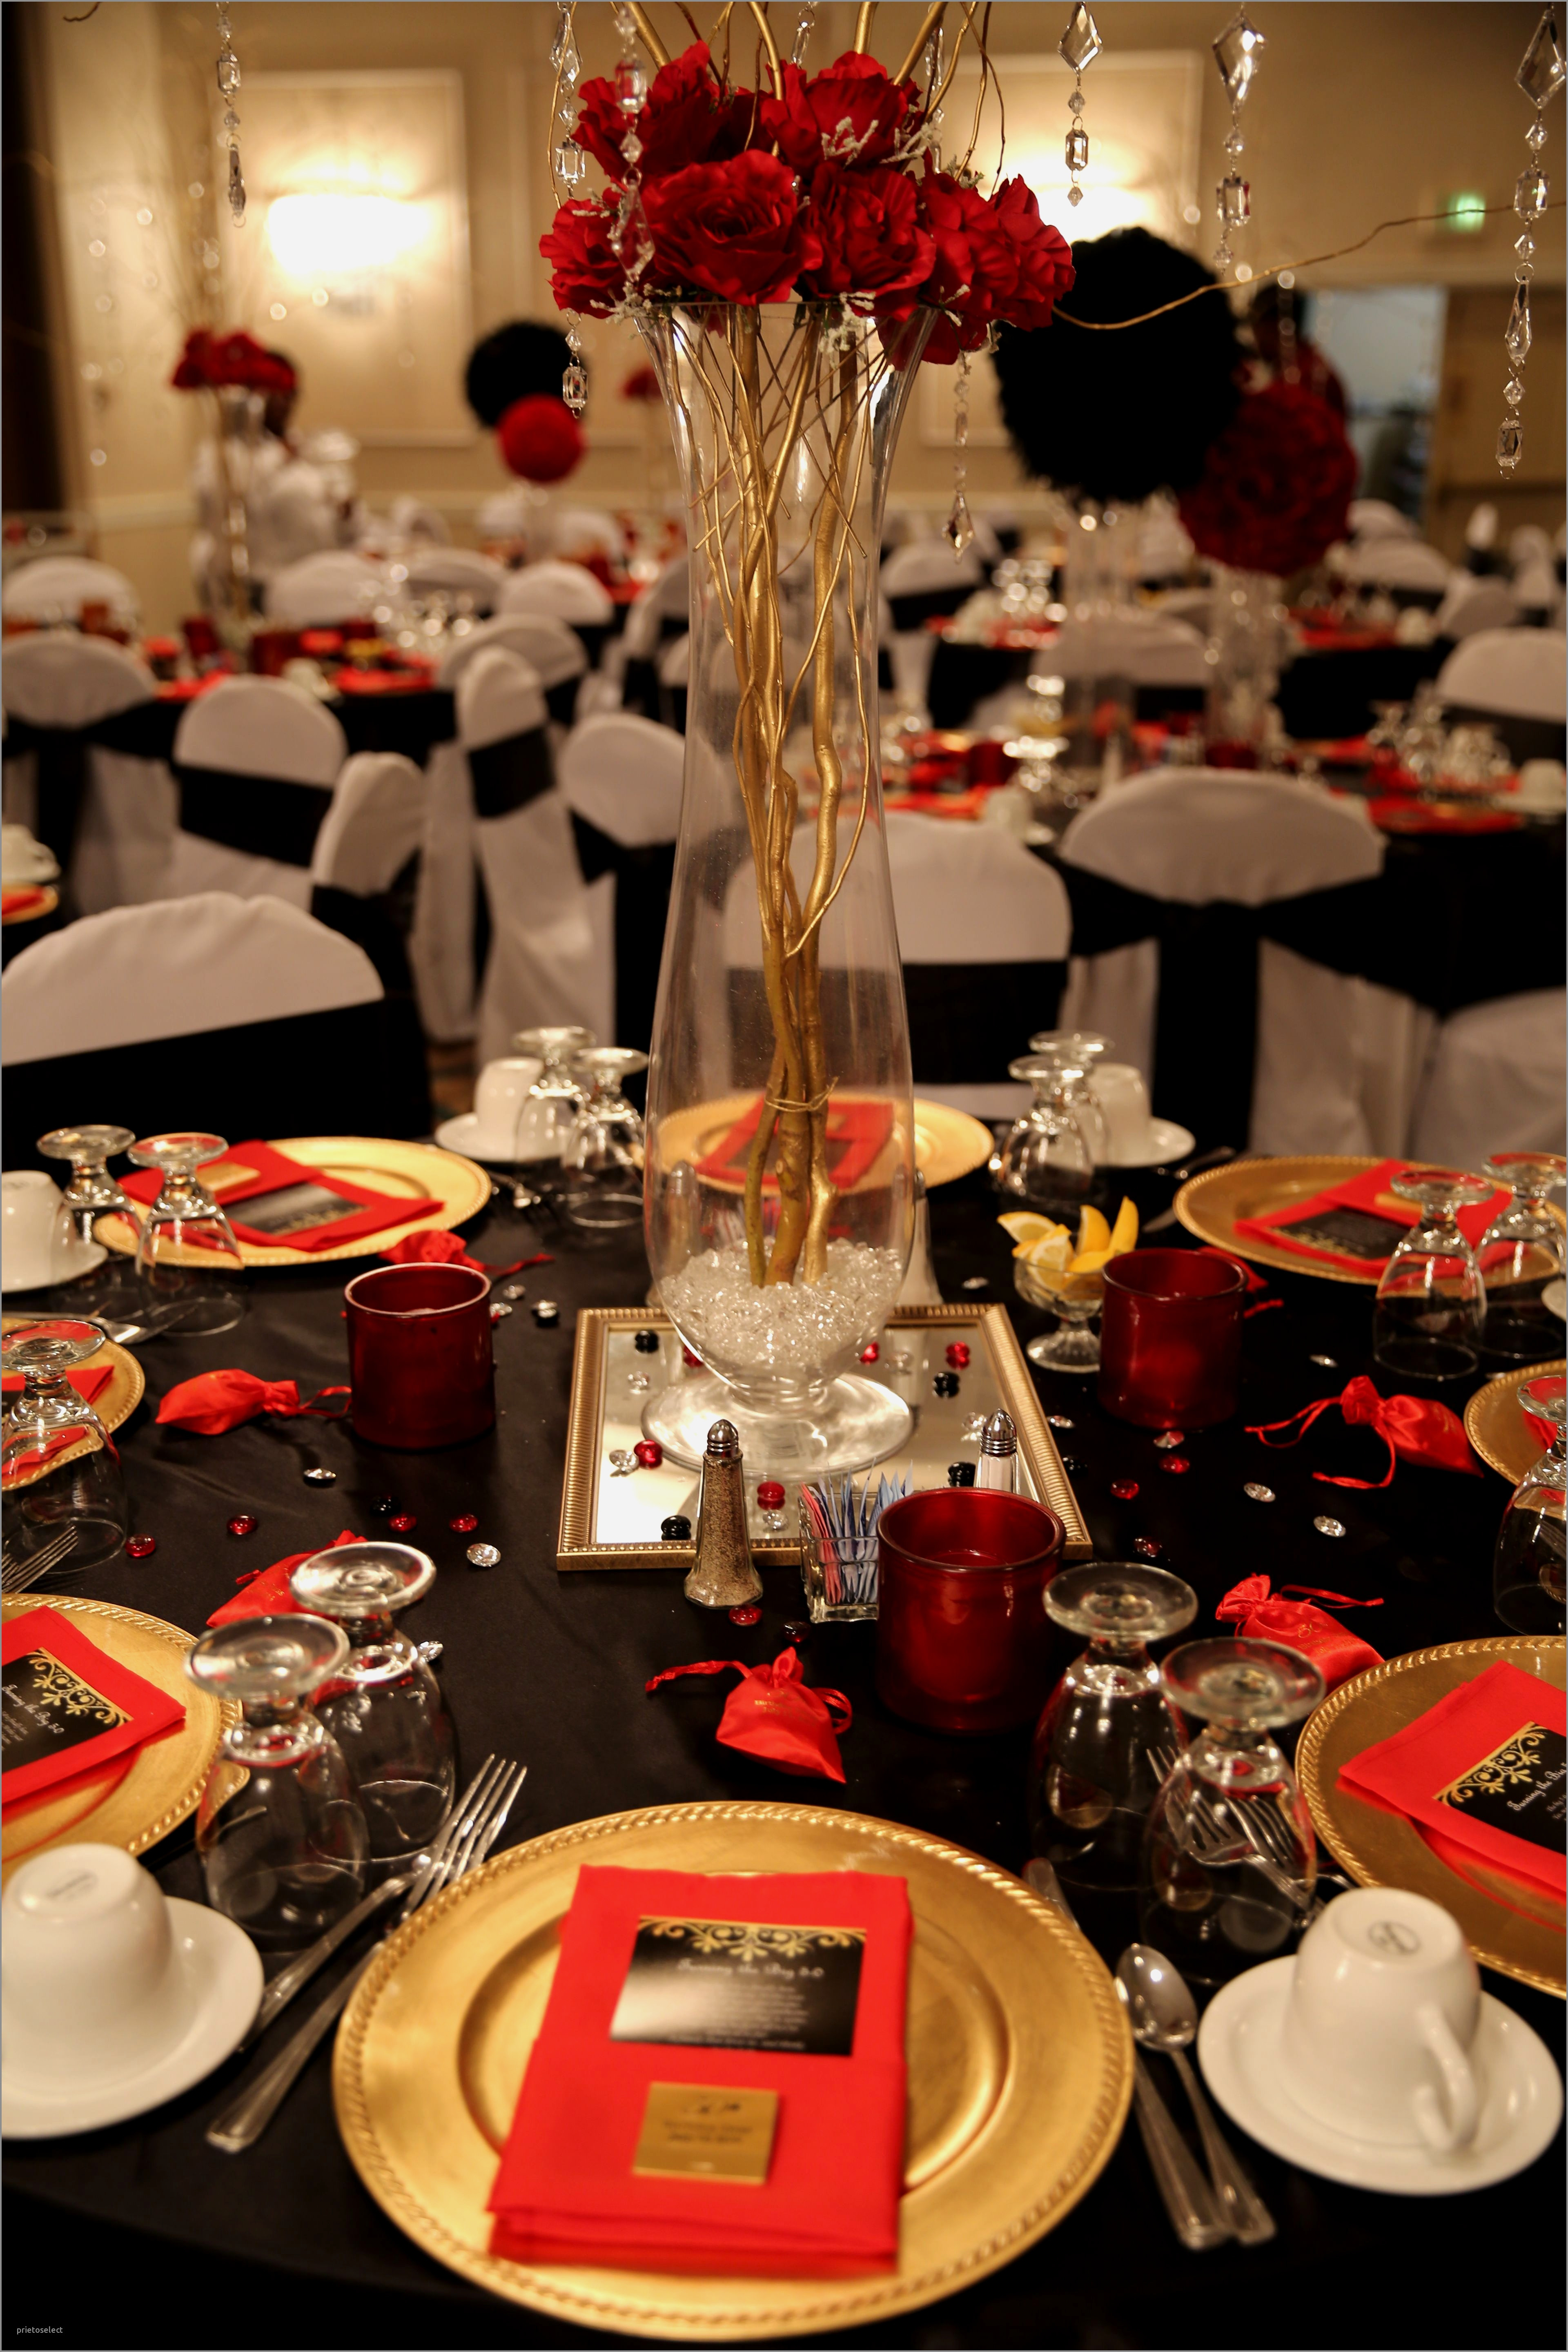 29 Fabulous Vase Filler Ideas for Weddings 2024 free download vase filler ideas for weddings of 75th birthday table decorations awesome ac2a2ec286a 15 cheap and easy diy inside 75th birthday table decorations best of red black and gold table decoration